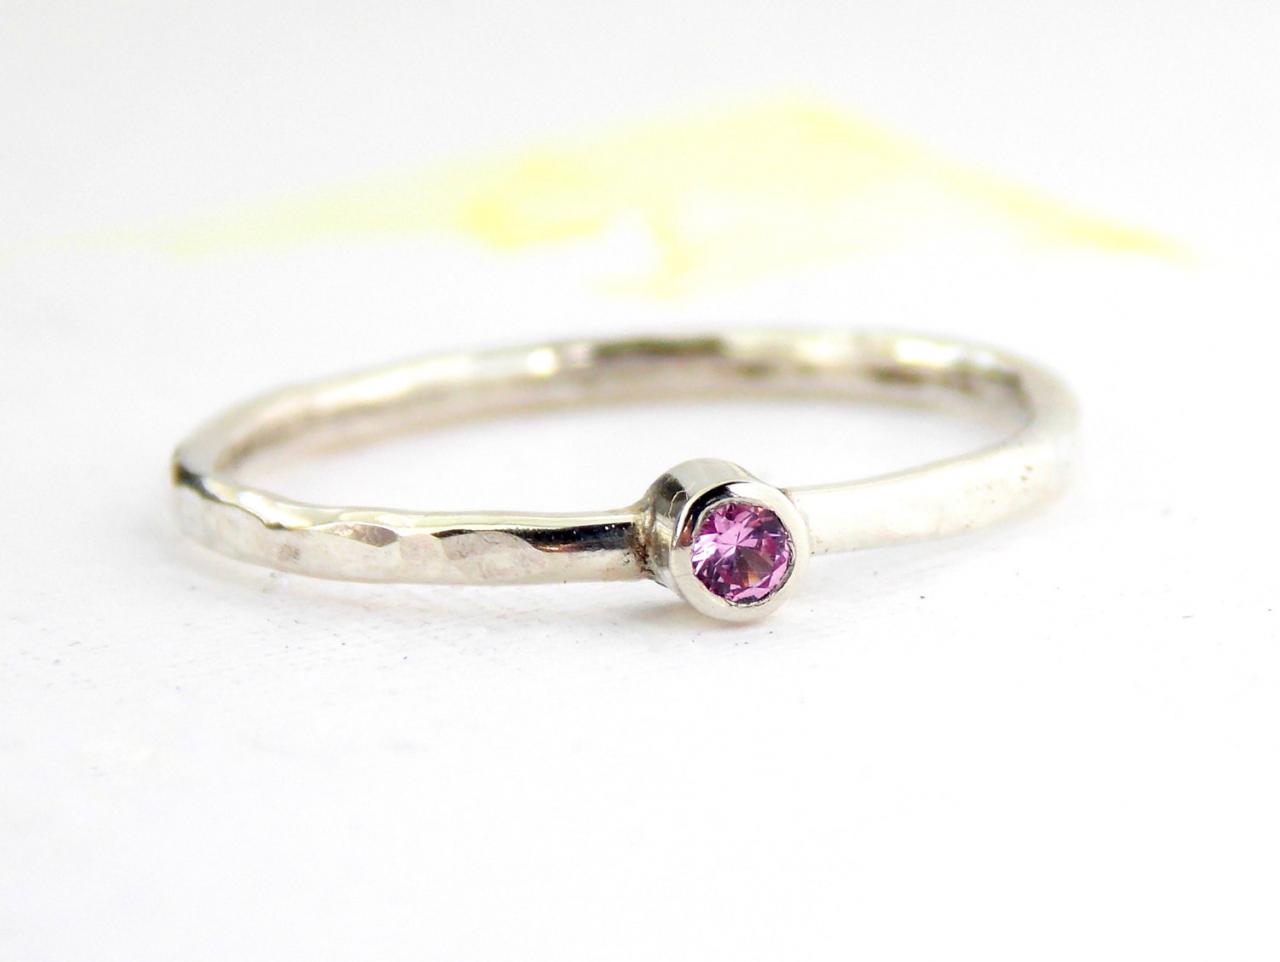 Tiny Hammered Birthstone Ring: Sterling Silver Ring, Dainty Ring, Tiny Ring, Small Ring, Birthstone Ring, Stacking Ring, Stackable Ring